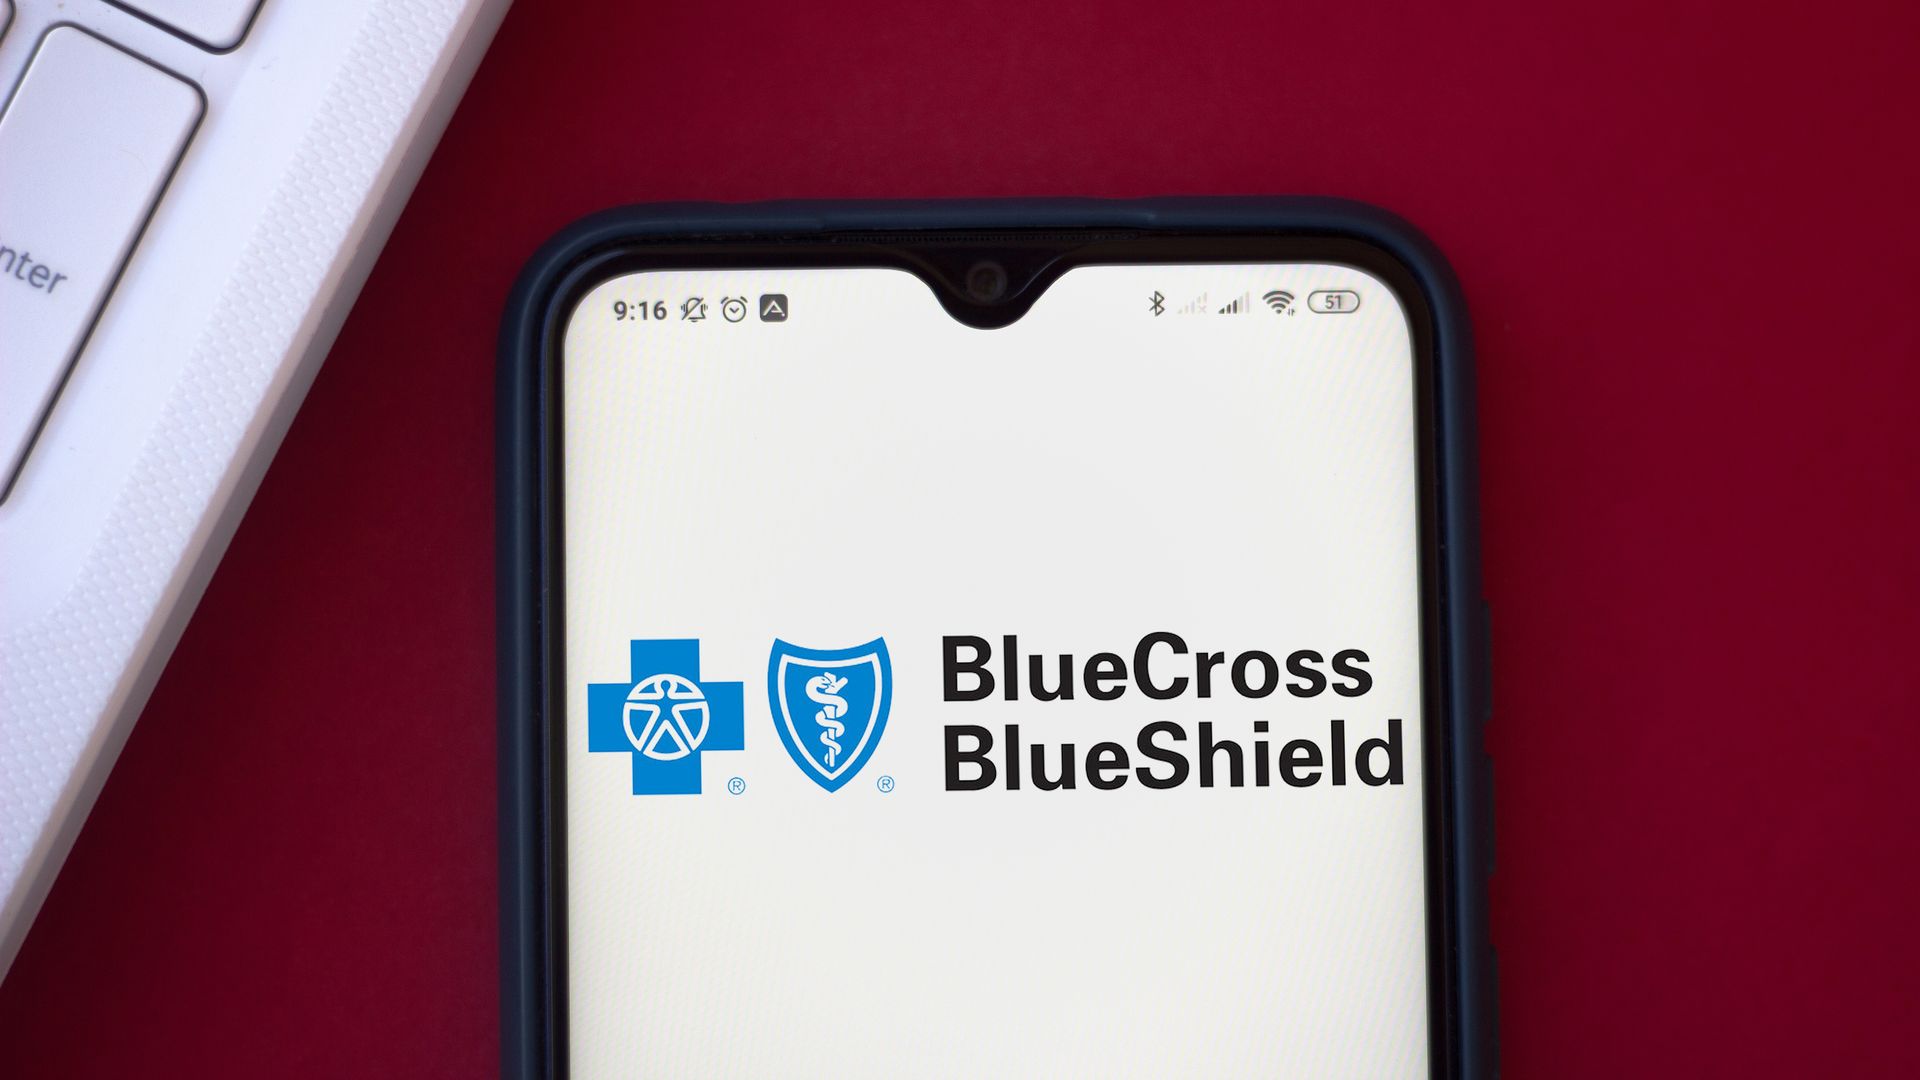 The Blue Cross and Blue Shield logo on a phone.